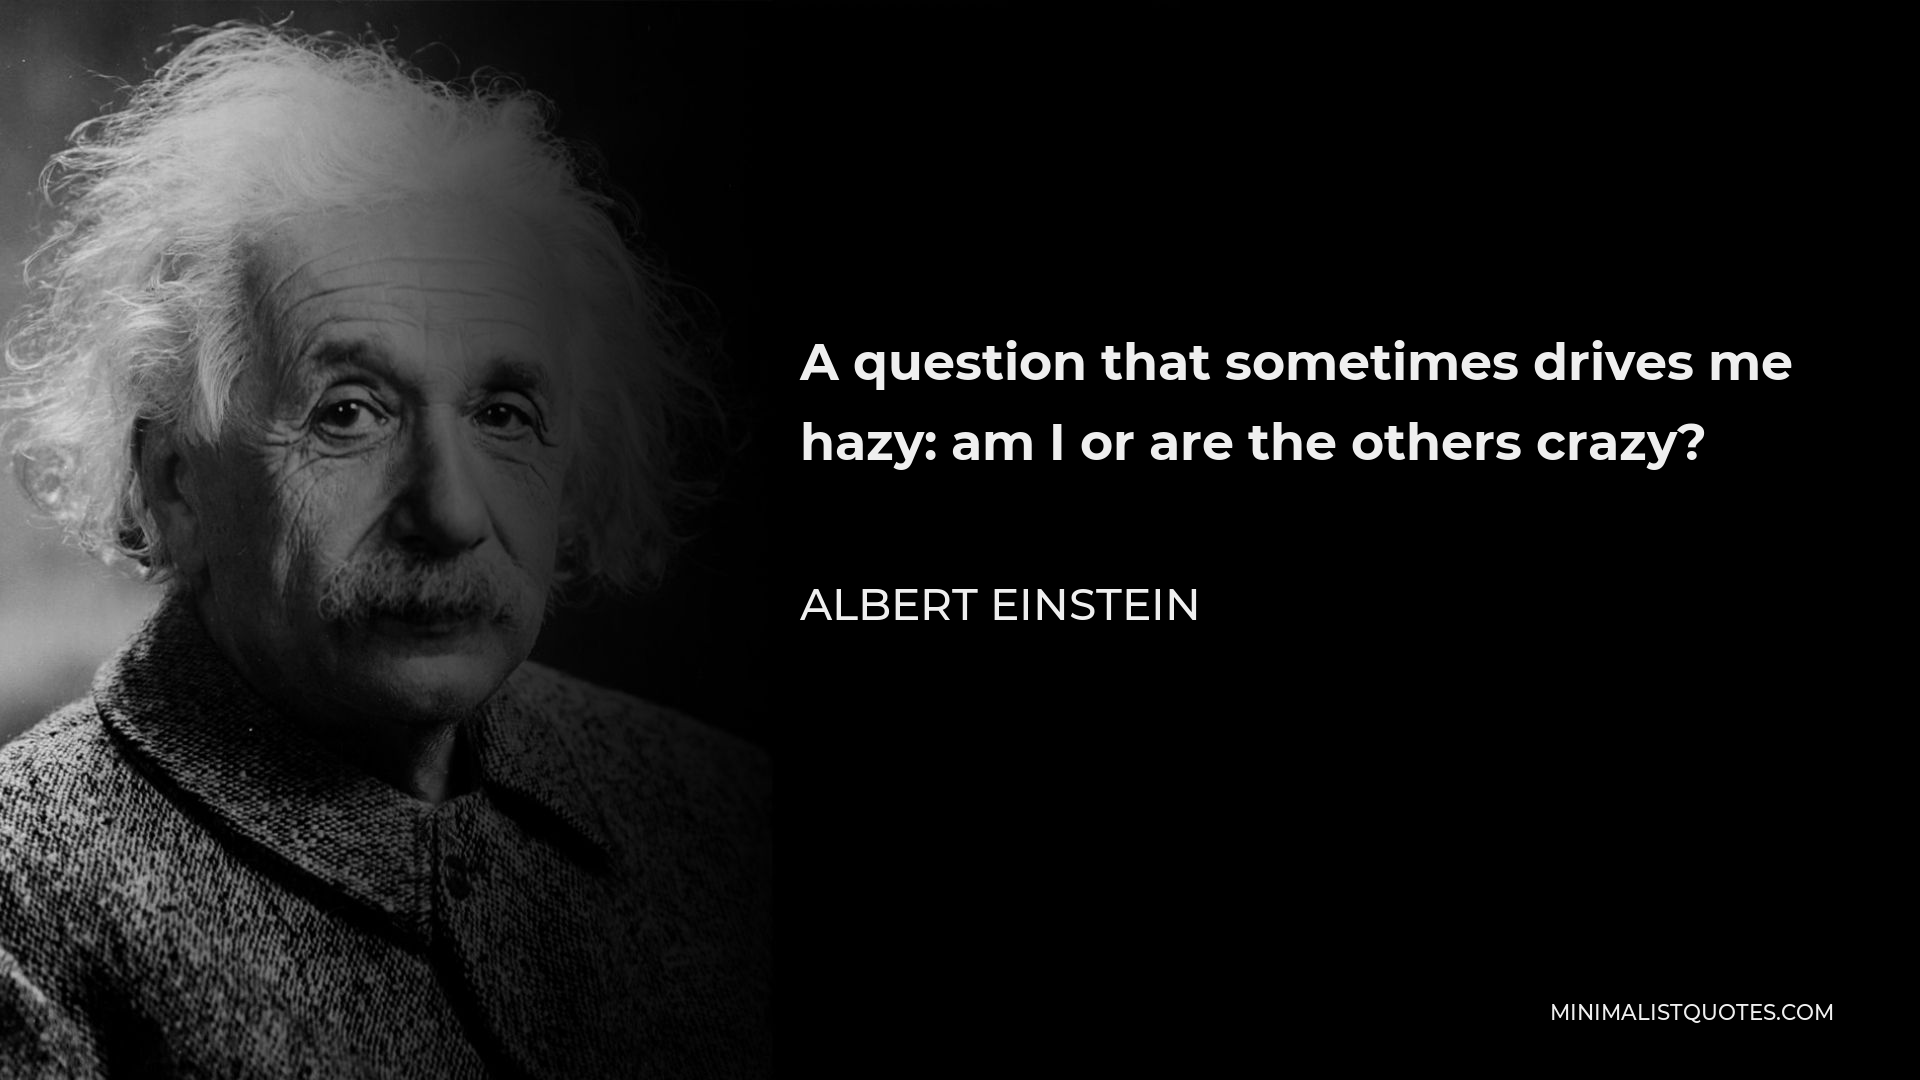 Albert Einstein Quote - A question that sometimes drives me hazy: am I or are the others crazy?